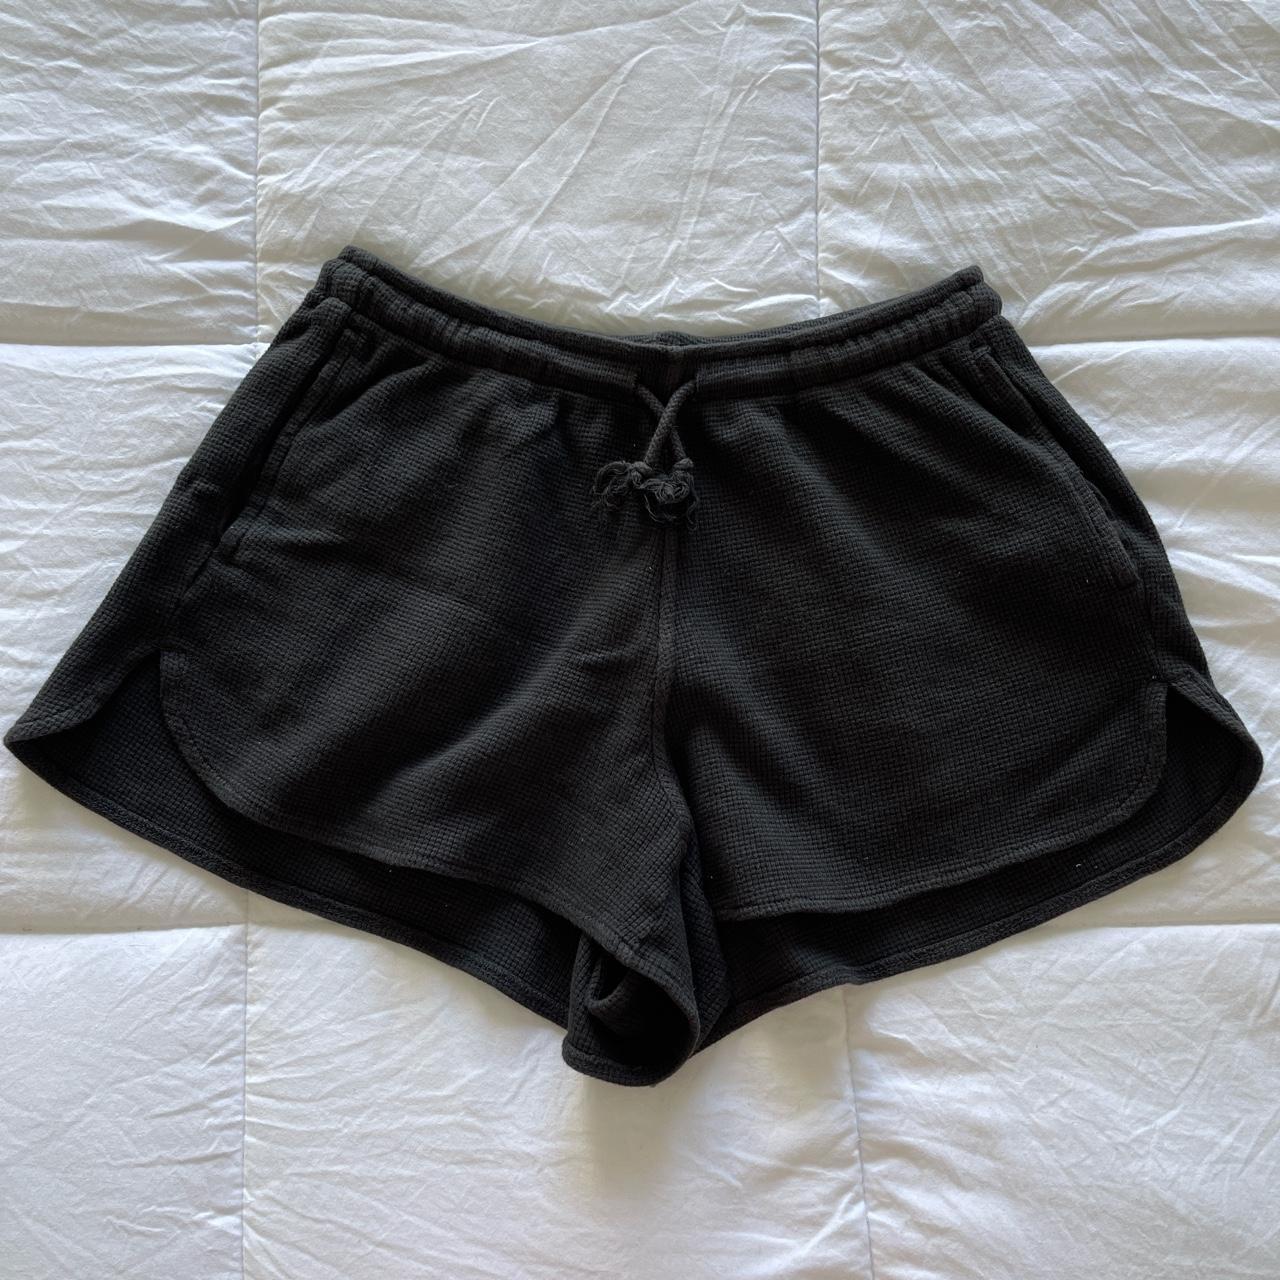 Black shorts from BRANDY MELVILLE - with pockets - Depop